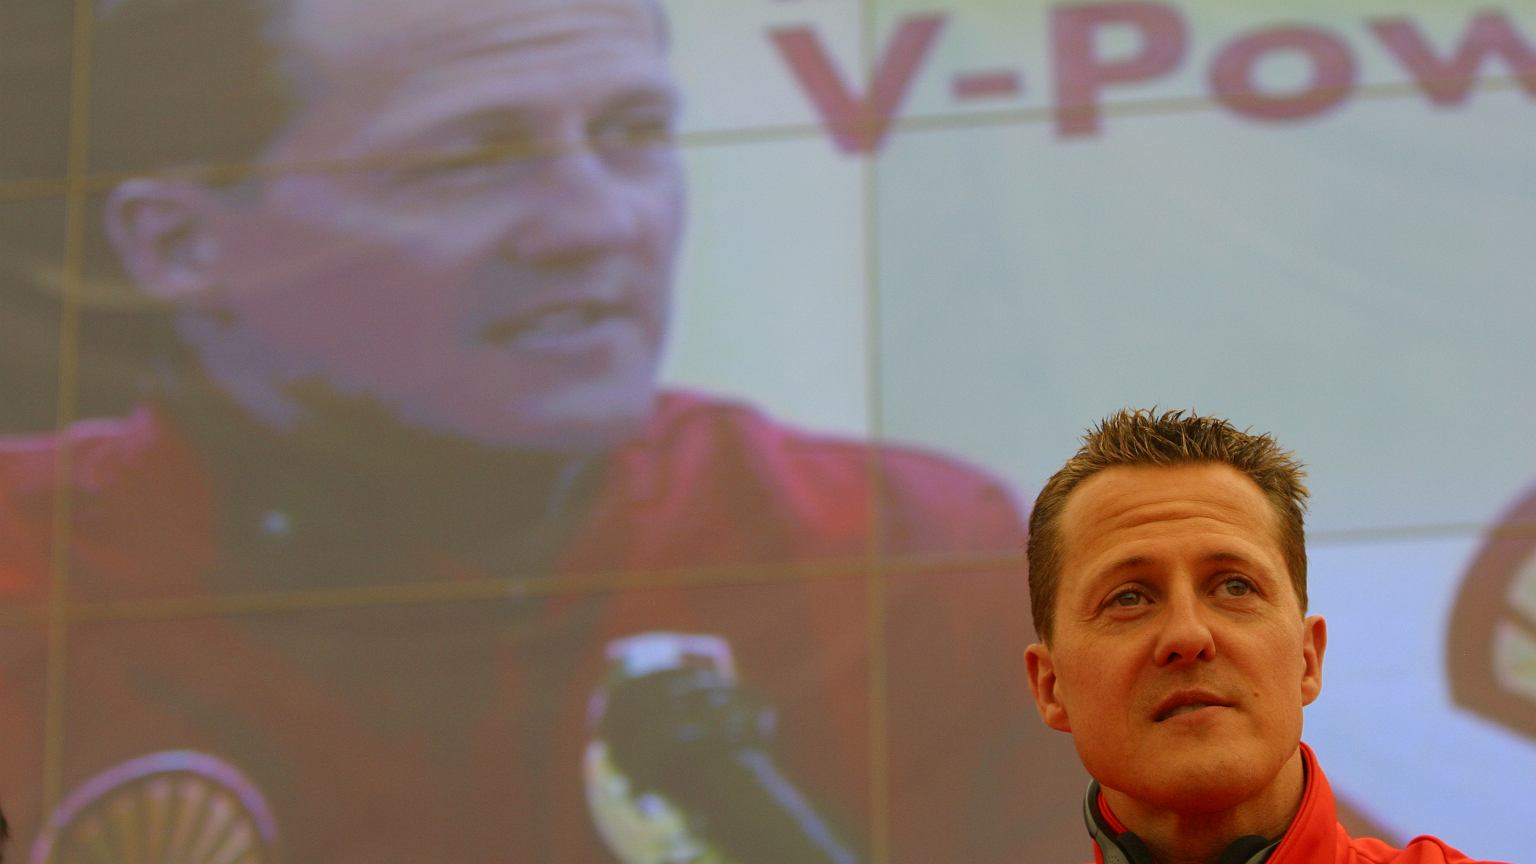 New information on Schumacher's health.  "I live with the consequences"